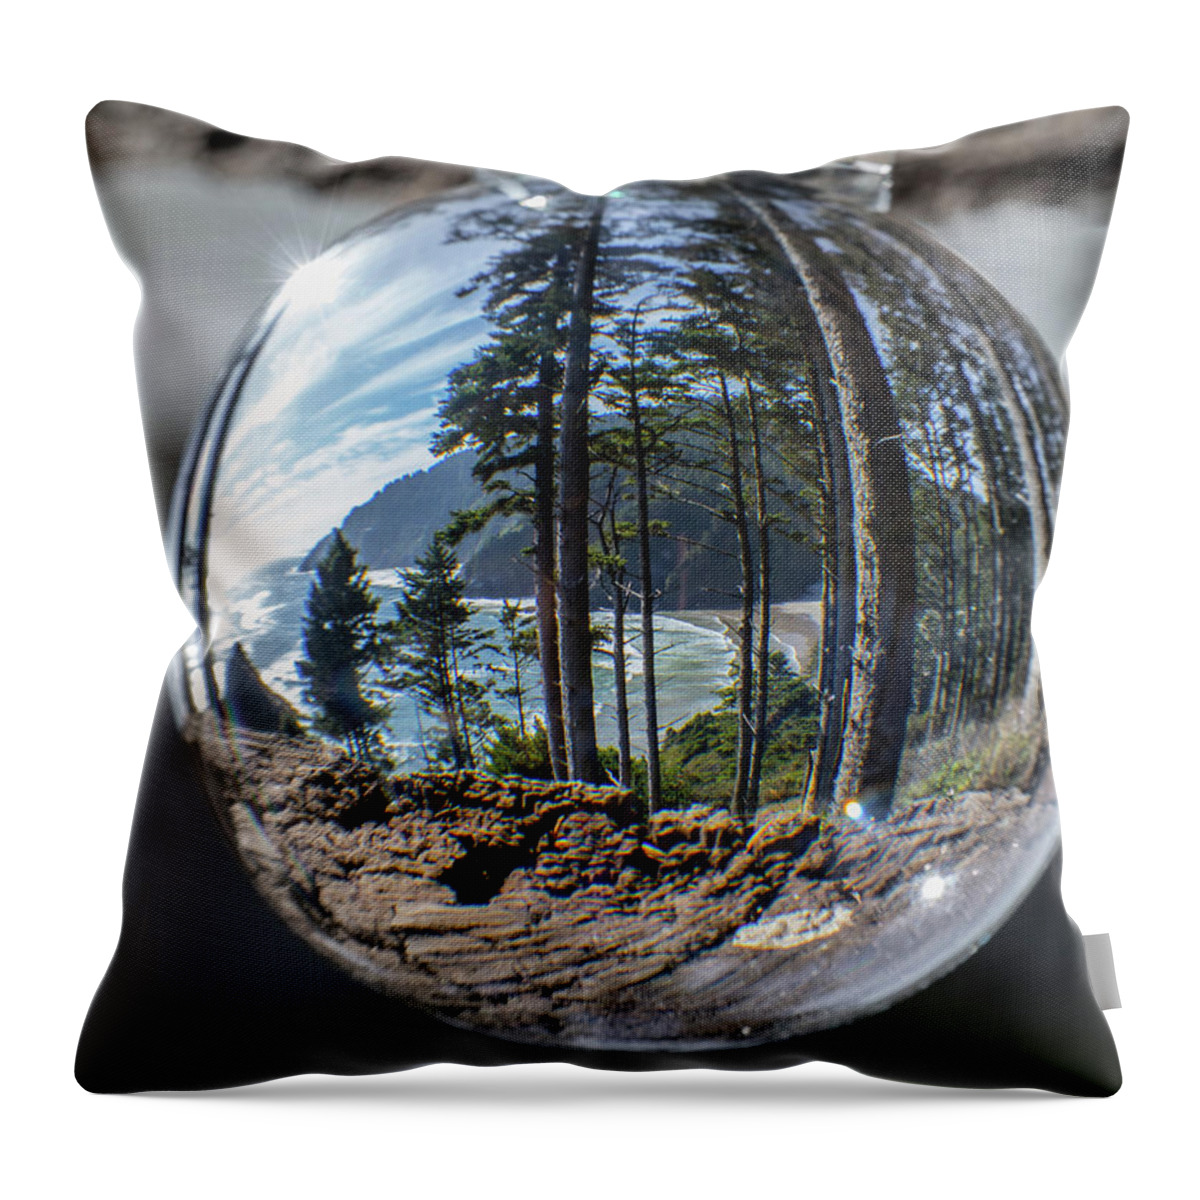 2018 Throw Pillow featuring the photograph Eagle's eye view by Gerri Bigler